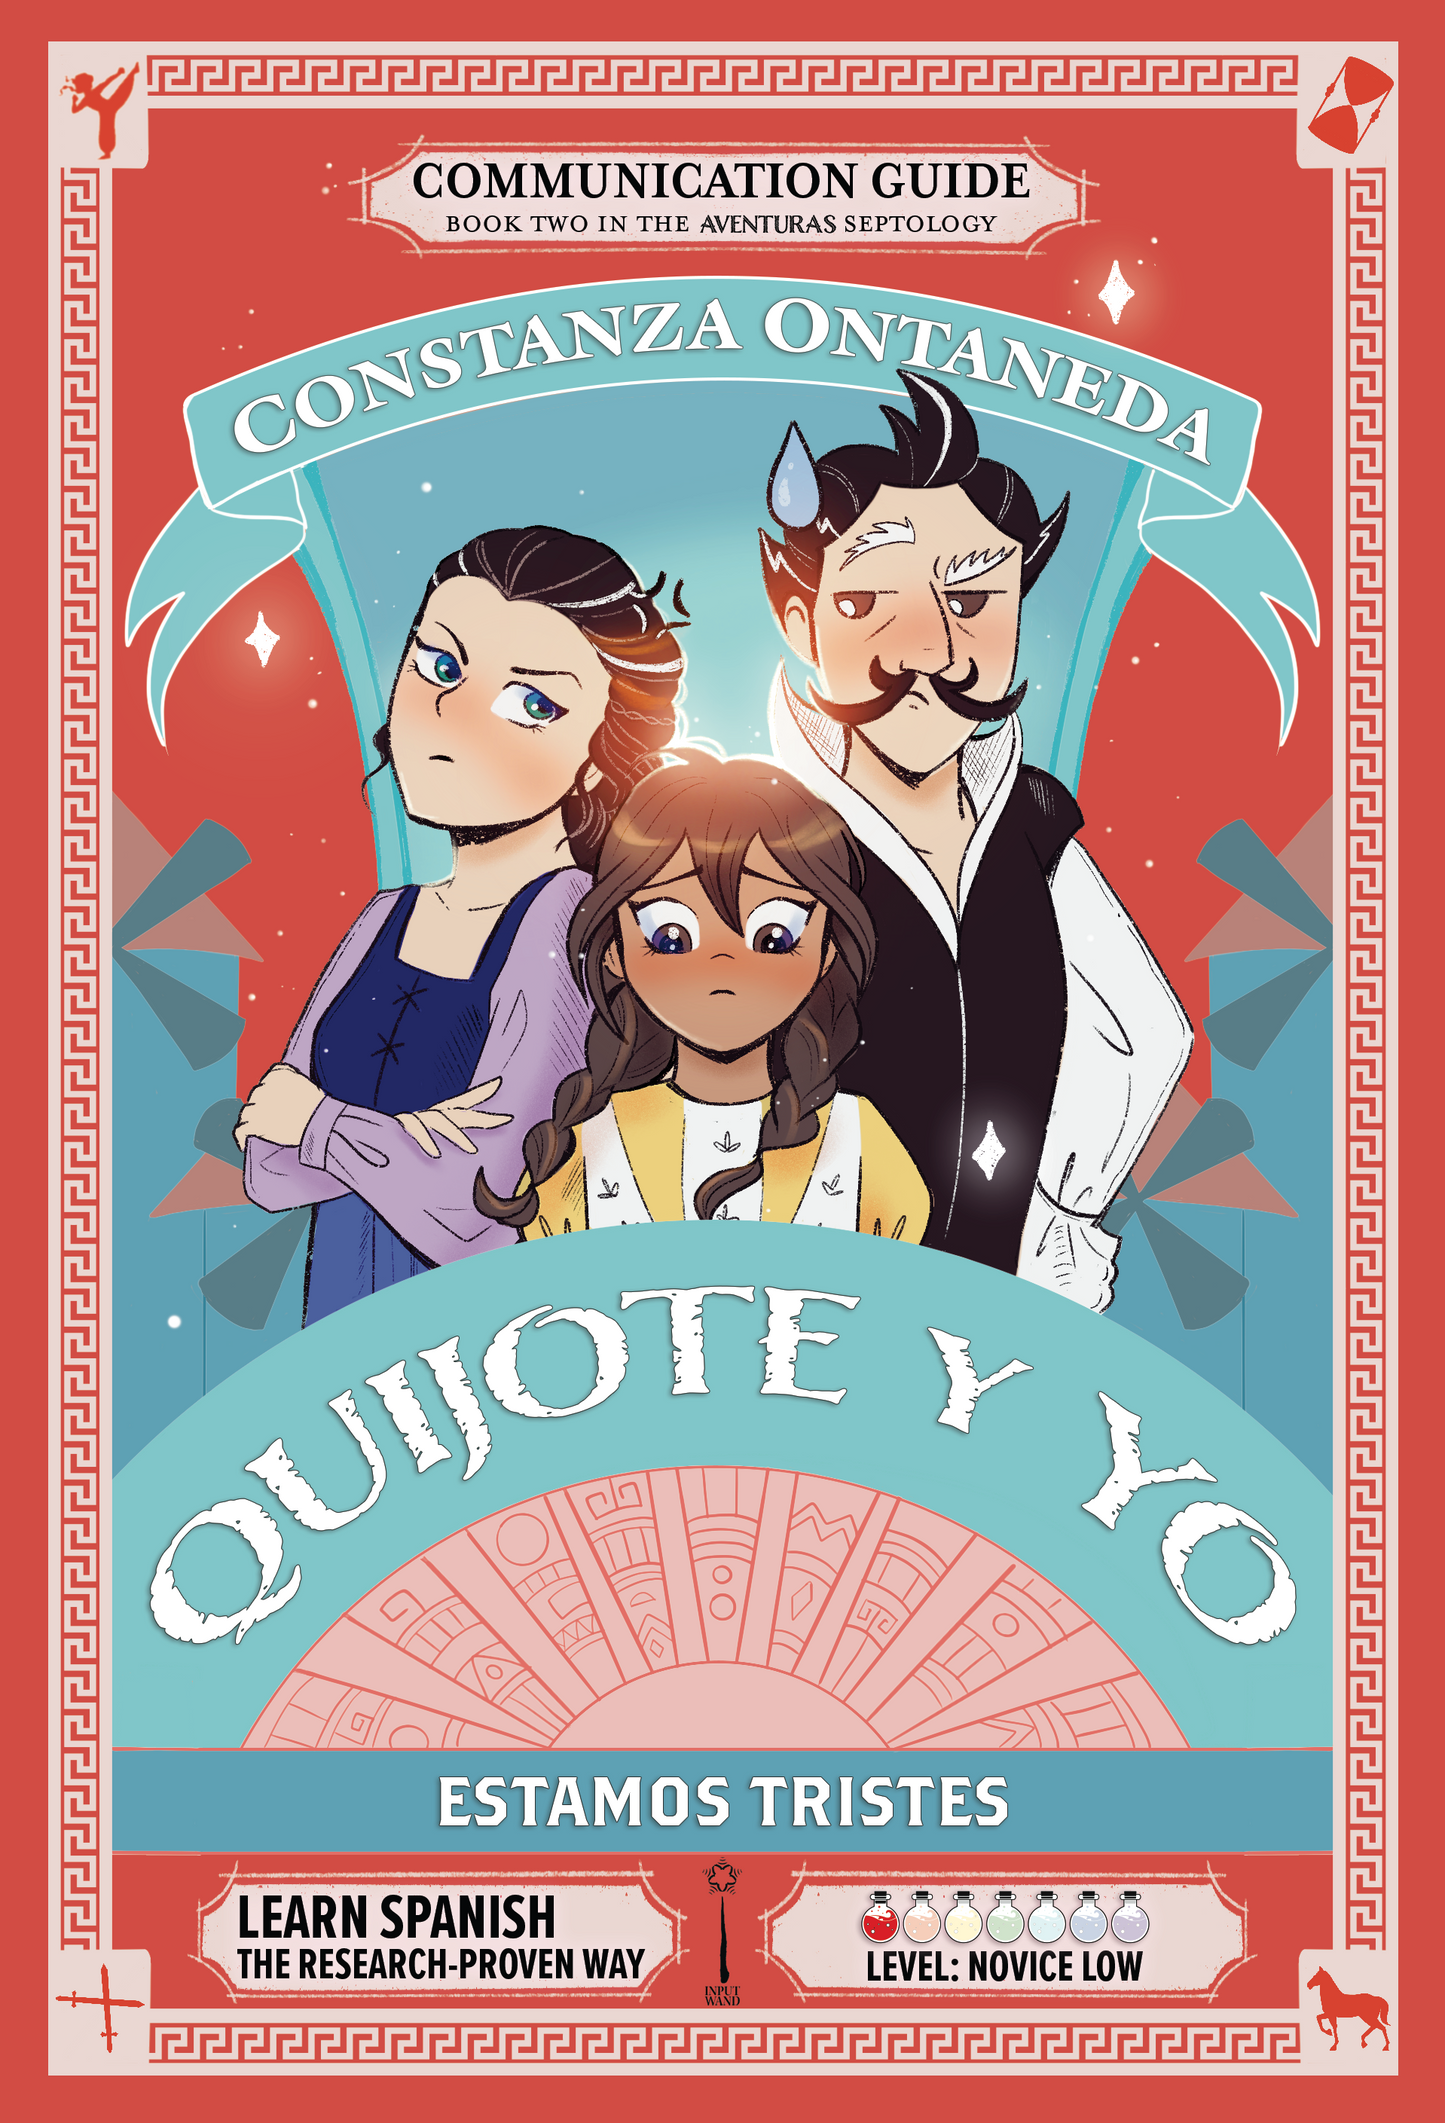 Communication Guide: Quijote y Yo: Estamos Tristes, Book Two in the Novice Low "Aventuras" Septology